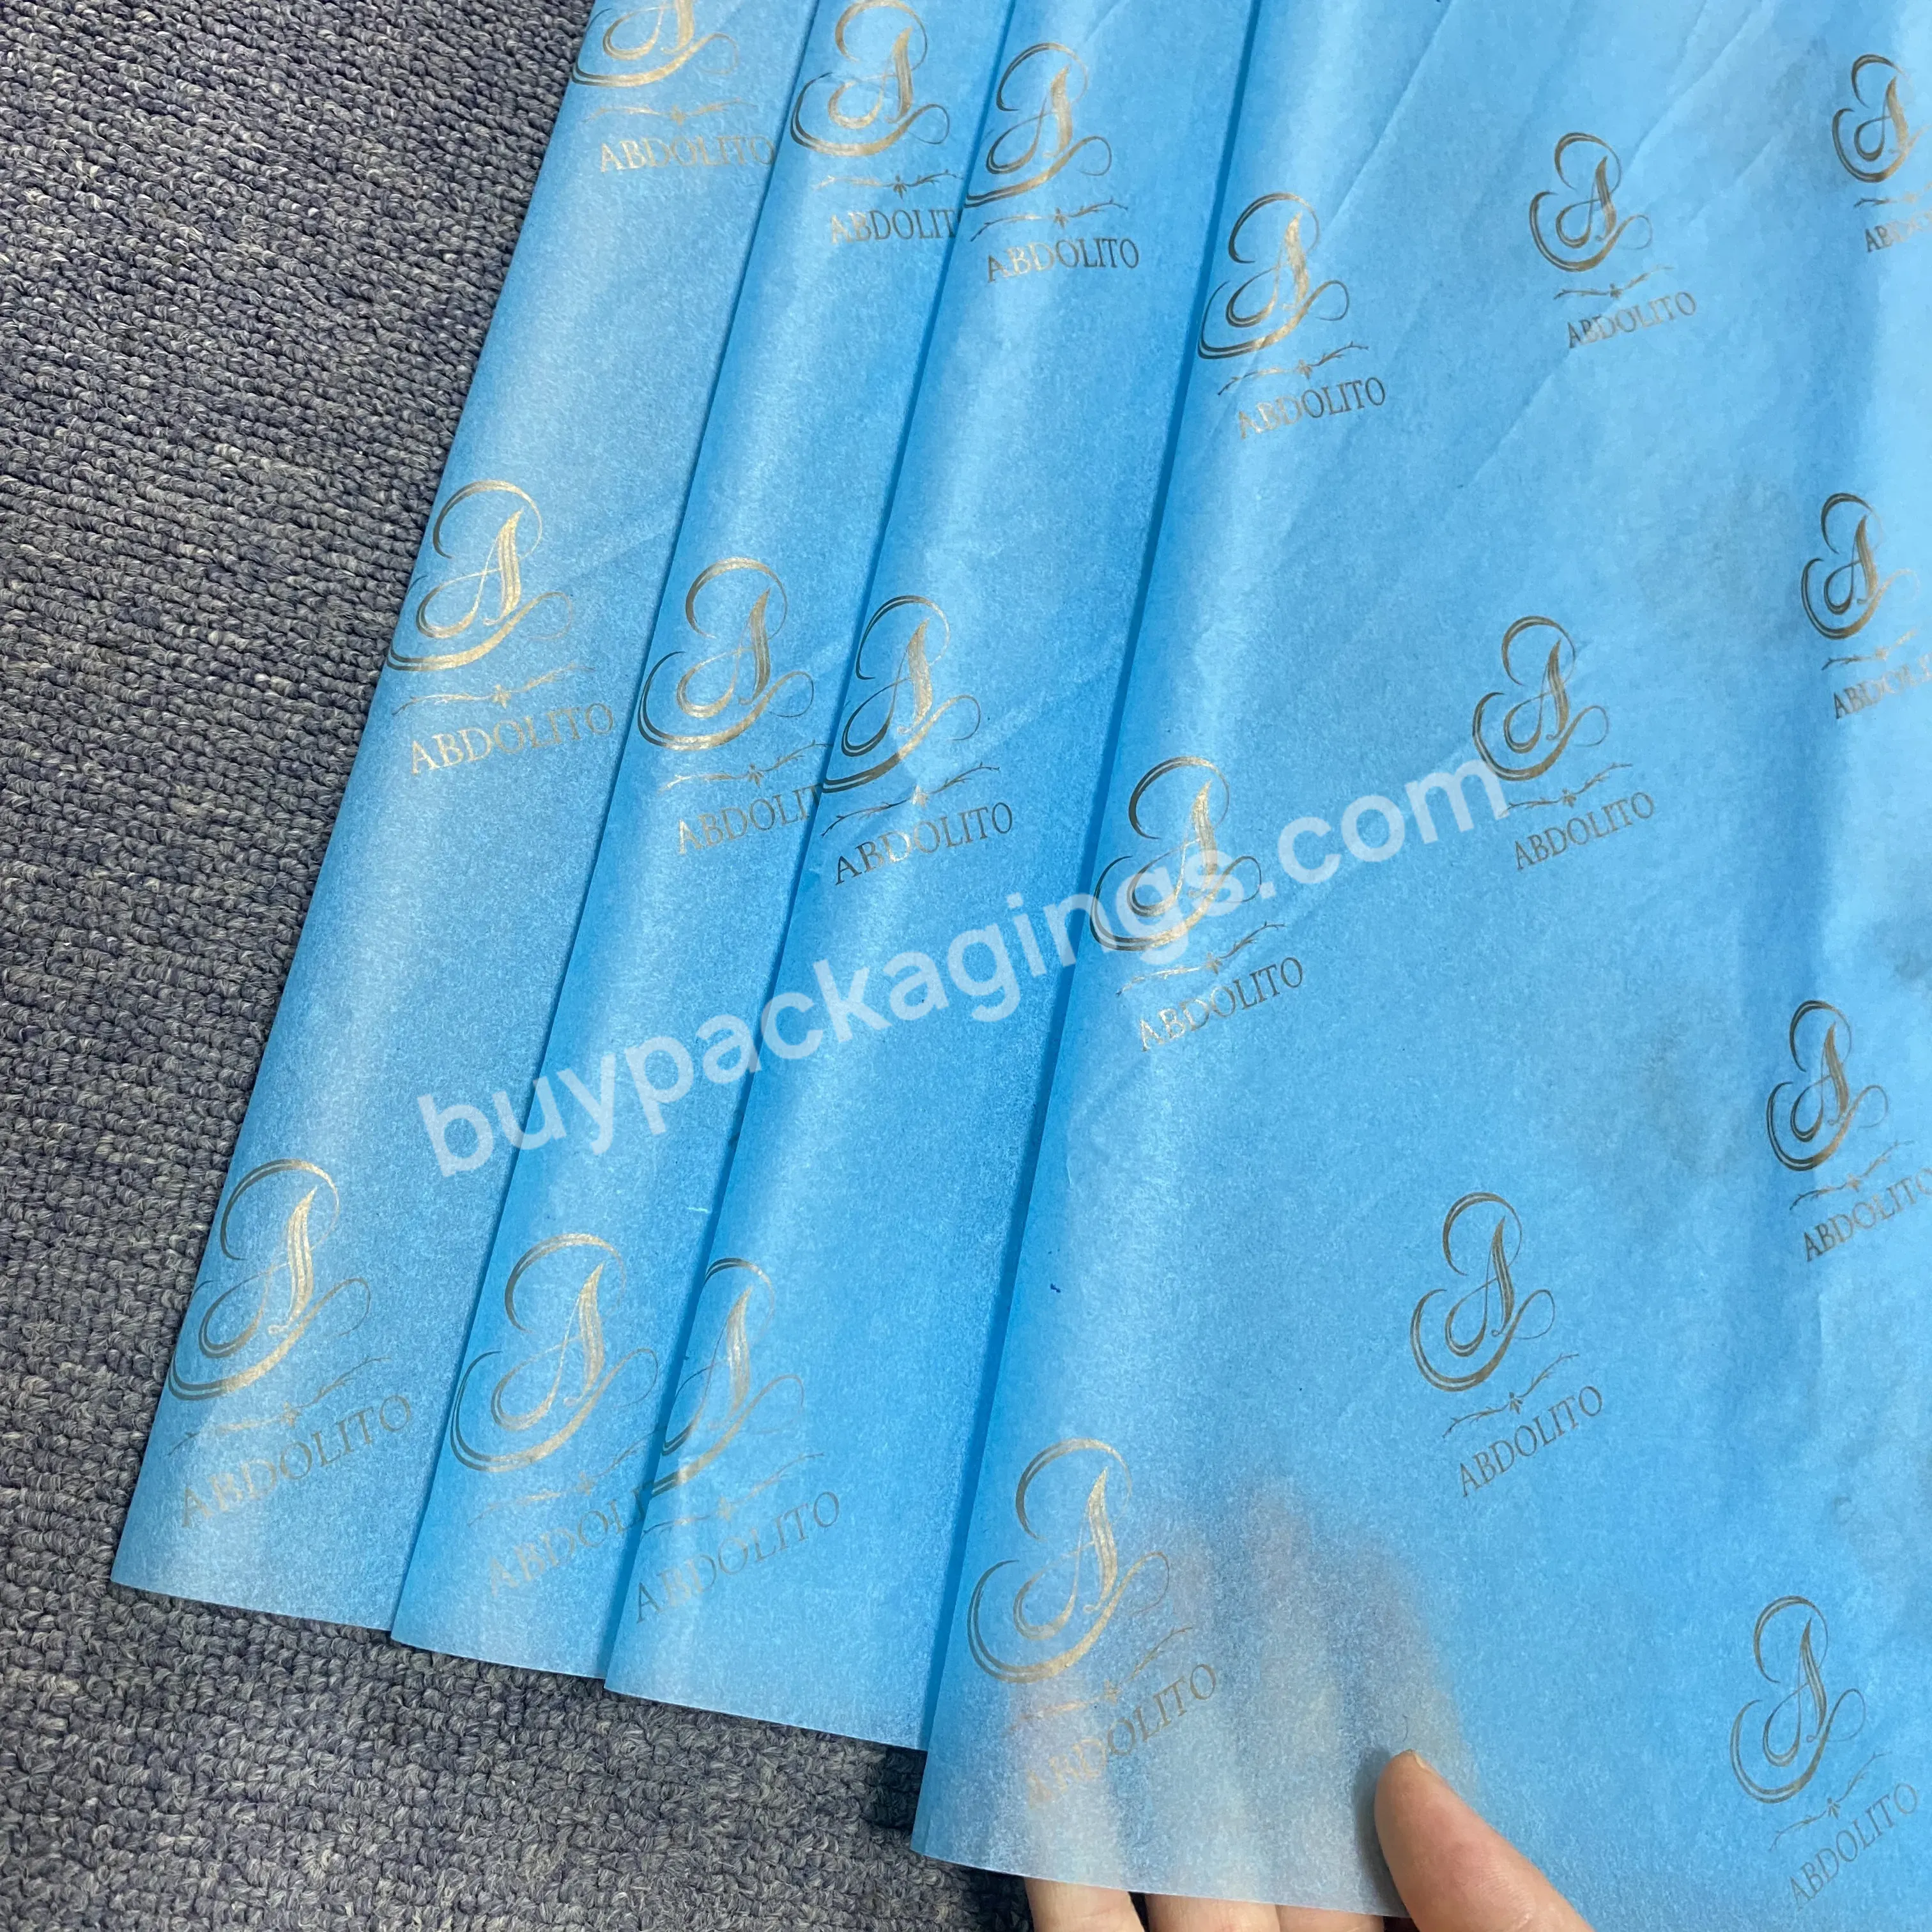 Wholesale Packaging Customized Logo Recycled Tissue Wrapping Paper With Company Logo Gift Wrapping Paper - Buy Wrapping Flowers And Clothing,Moq Is 100 Pcs,Customized Logo And Size.